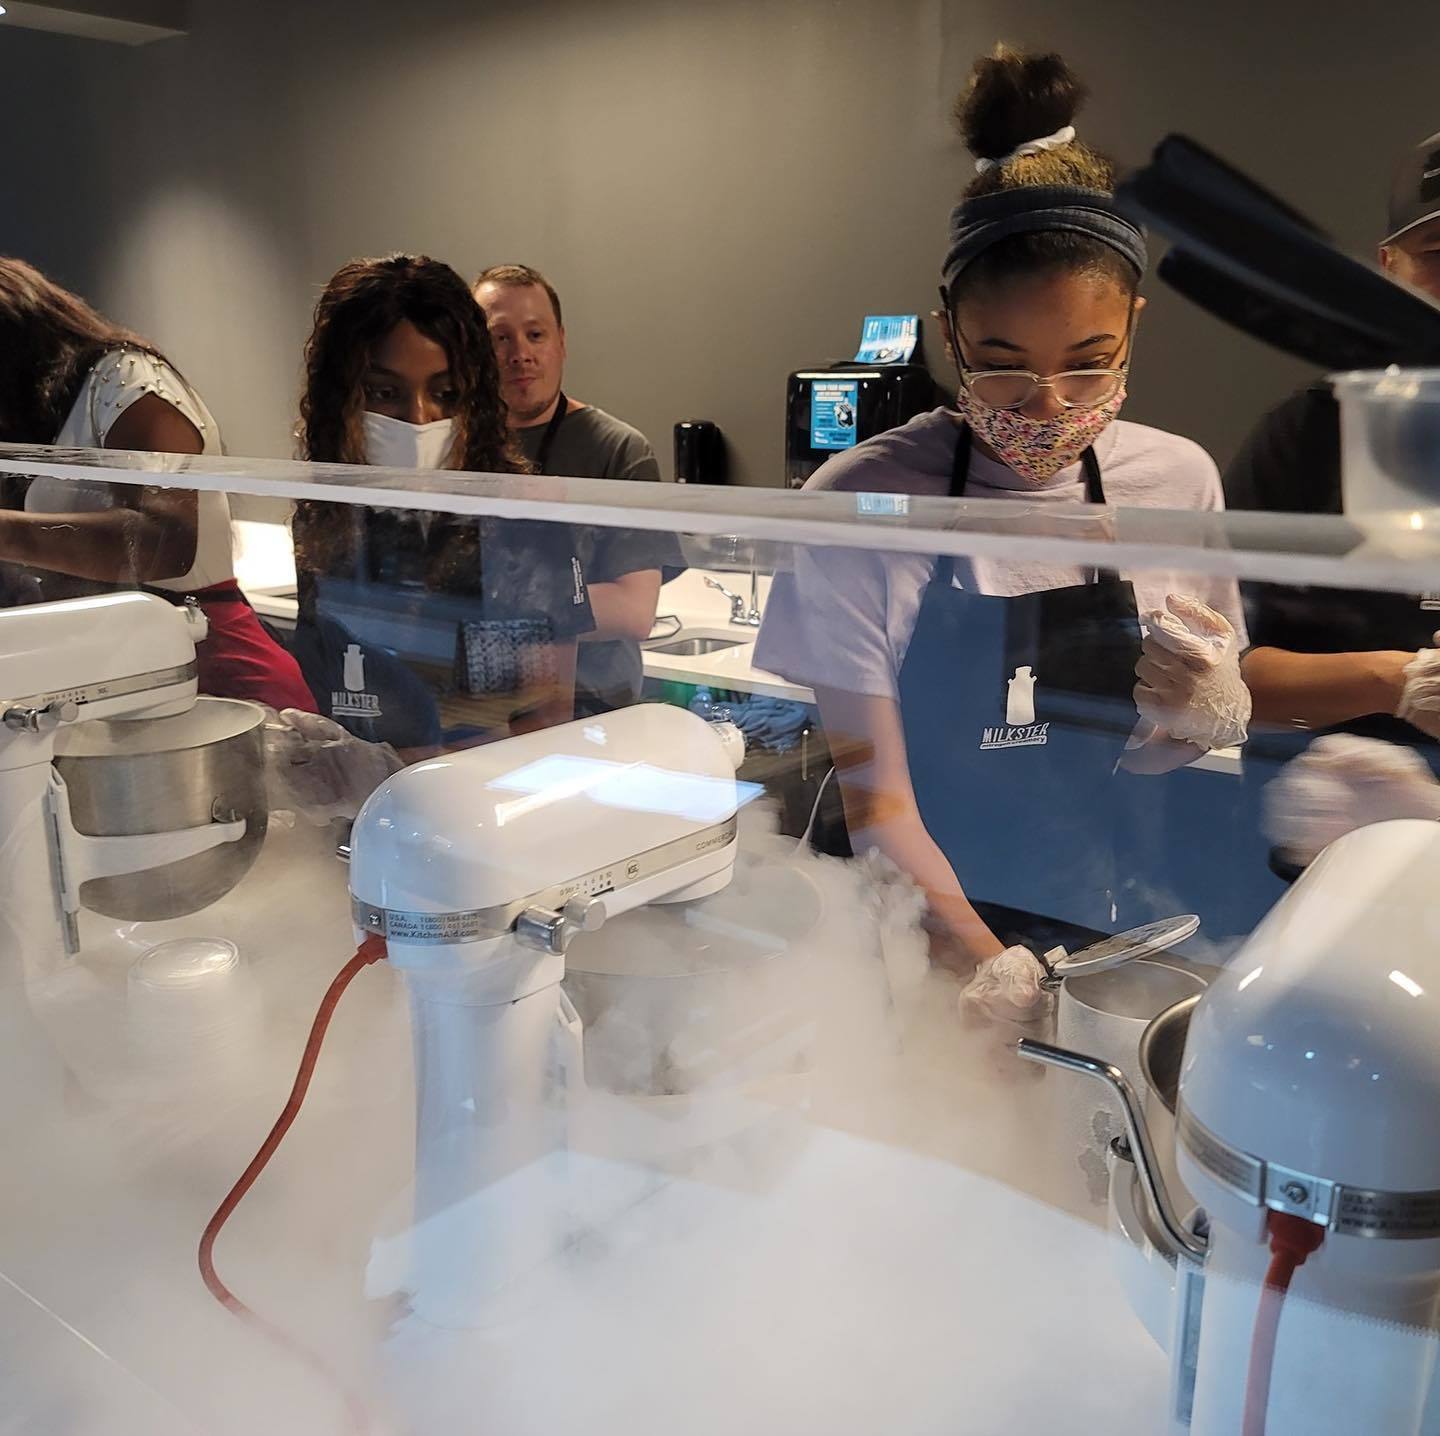 After ingredients are selected, the ice cream is created using liquid nitrogen.